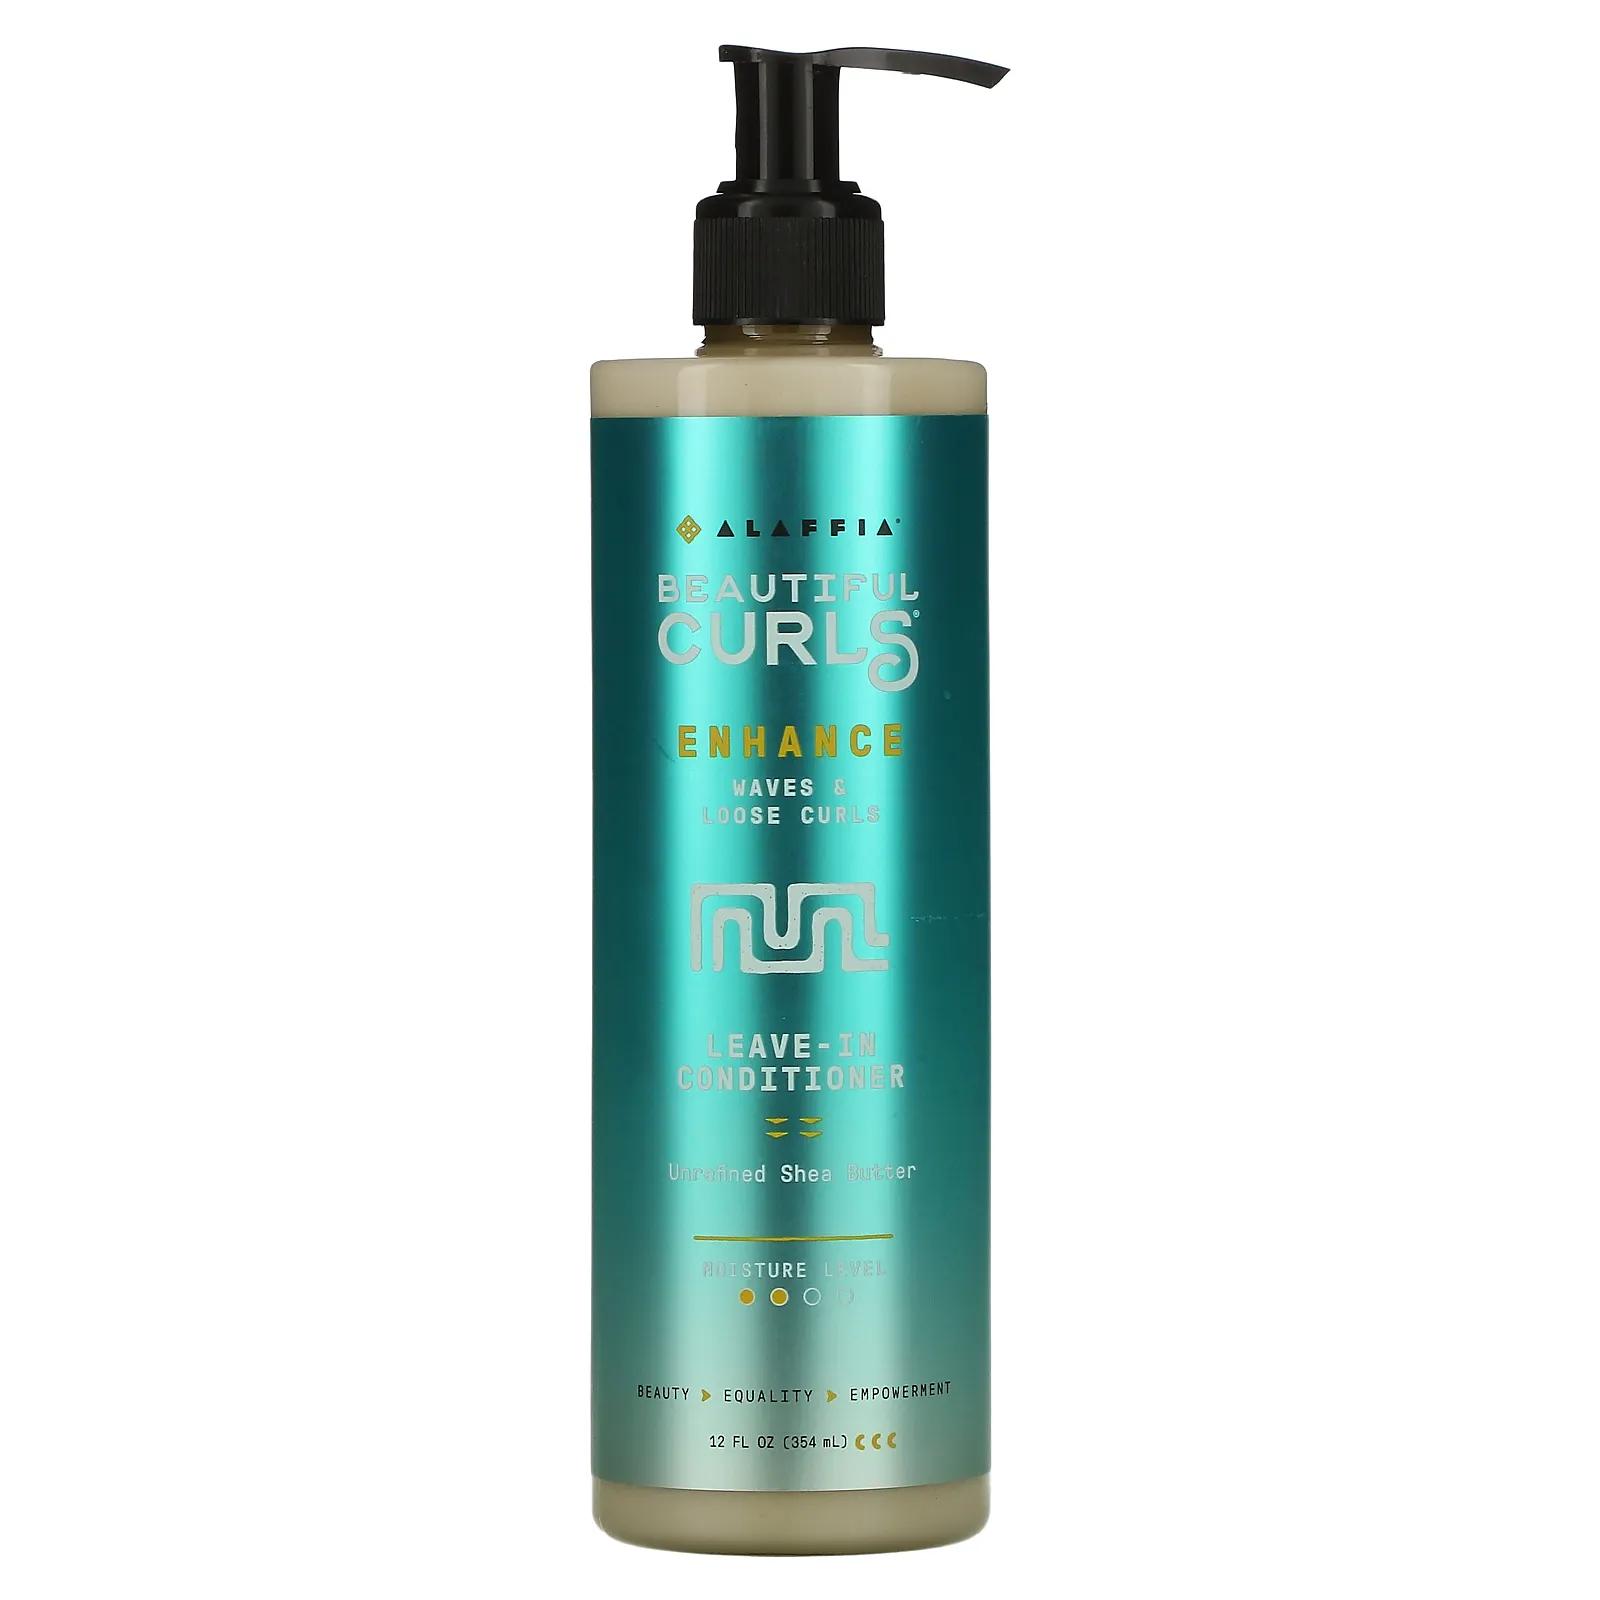 Alaffia Beautiful Curls Curl Enhancing Leave-In Conditioner Wavy to Curly Unrefined Shea Butter 12 fl oz (354 ml)